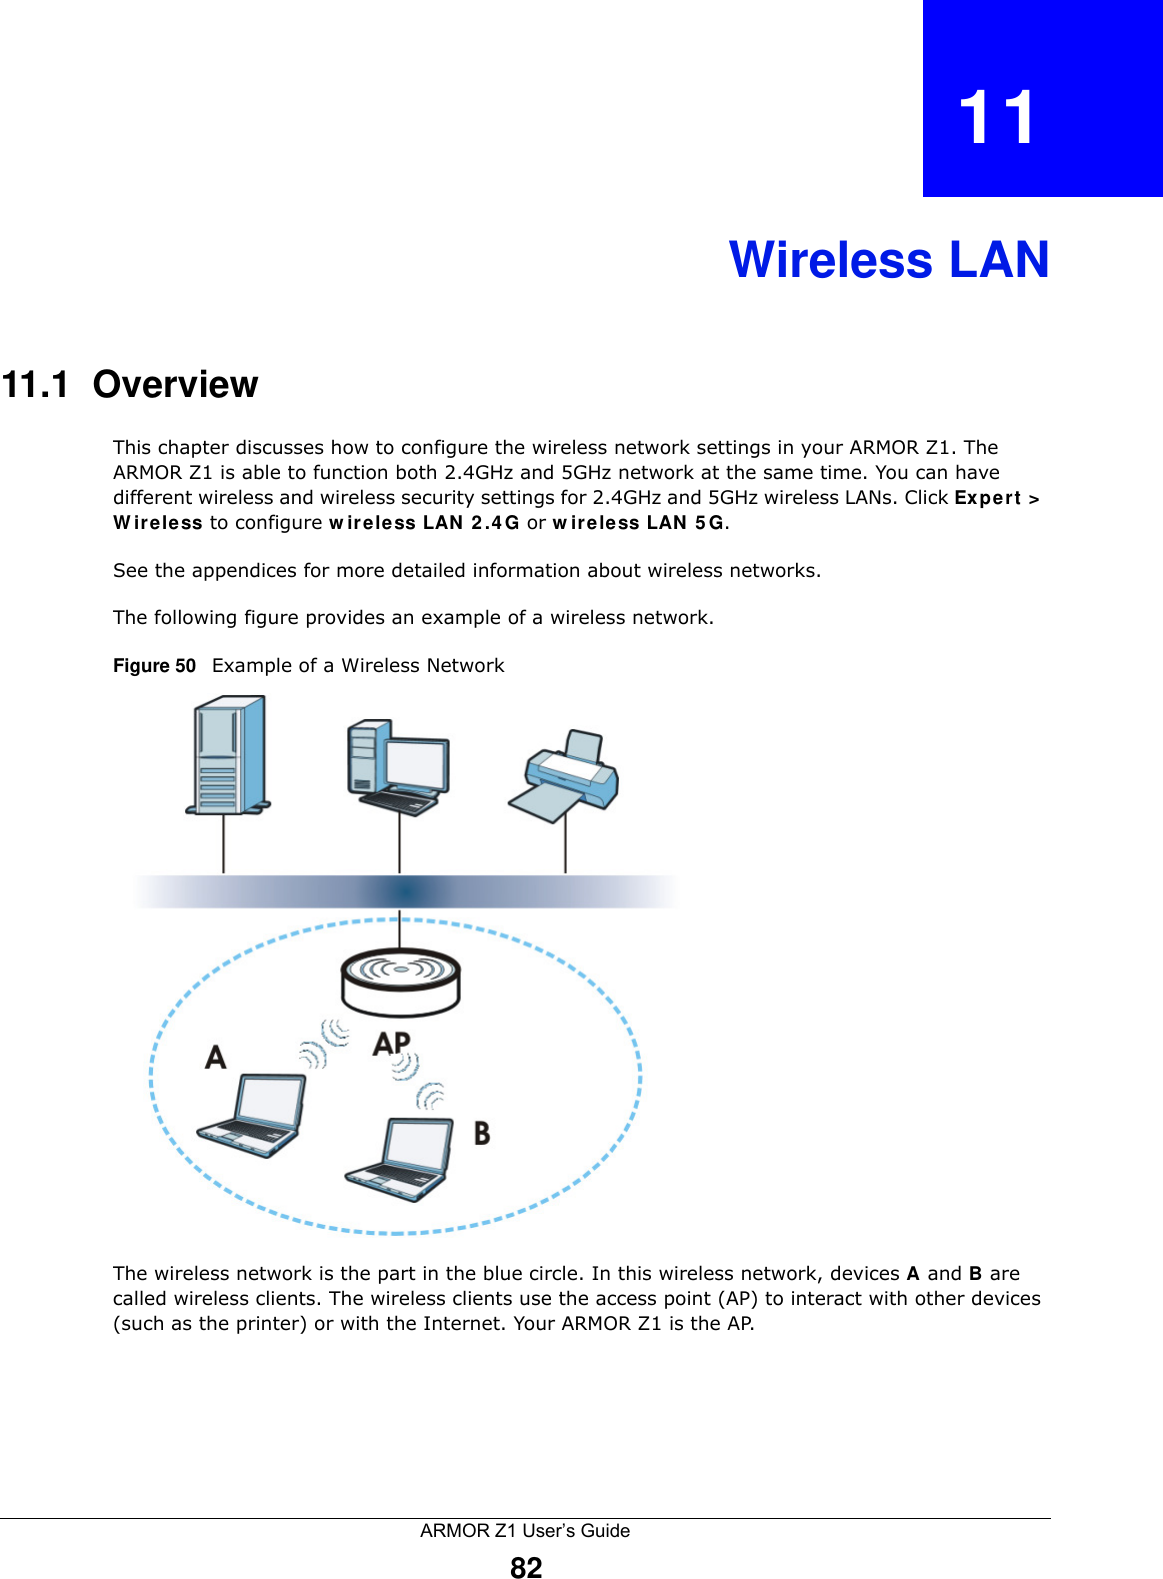 ARMOR Z1 User’s Guide82CHAPTER   11Wireless LAN11.1  OverviewThis chapter discusses how to configure the wireless network settings in your ARMOR Z1. The ARMOR Z1 is able to function both 2.4GHz and 5GHz network at the same time. You can have different wireless and wireless security settings for 2.4GHz and 5GHz wireless LANs. Click Expert &gt; Wireless to configure wireless LAN 2.4G or wireless LAN 5G.See the appendices for more detailed information about wireless networks.The following figure provides an example of a wireless network.Figure 50   Example of a Wireless NetworkThe wireless network is the part in the blue circle. In this wireless network, devices A and B are called wireless clients. The wireless clients use the access point (AP) to interact with other devices (such as the printer) or with the Internet. Your ARMOR Z1 is the AP.